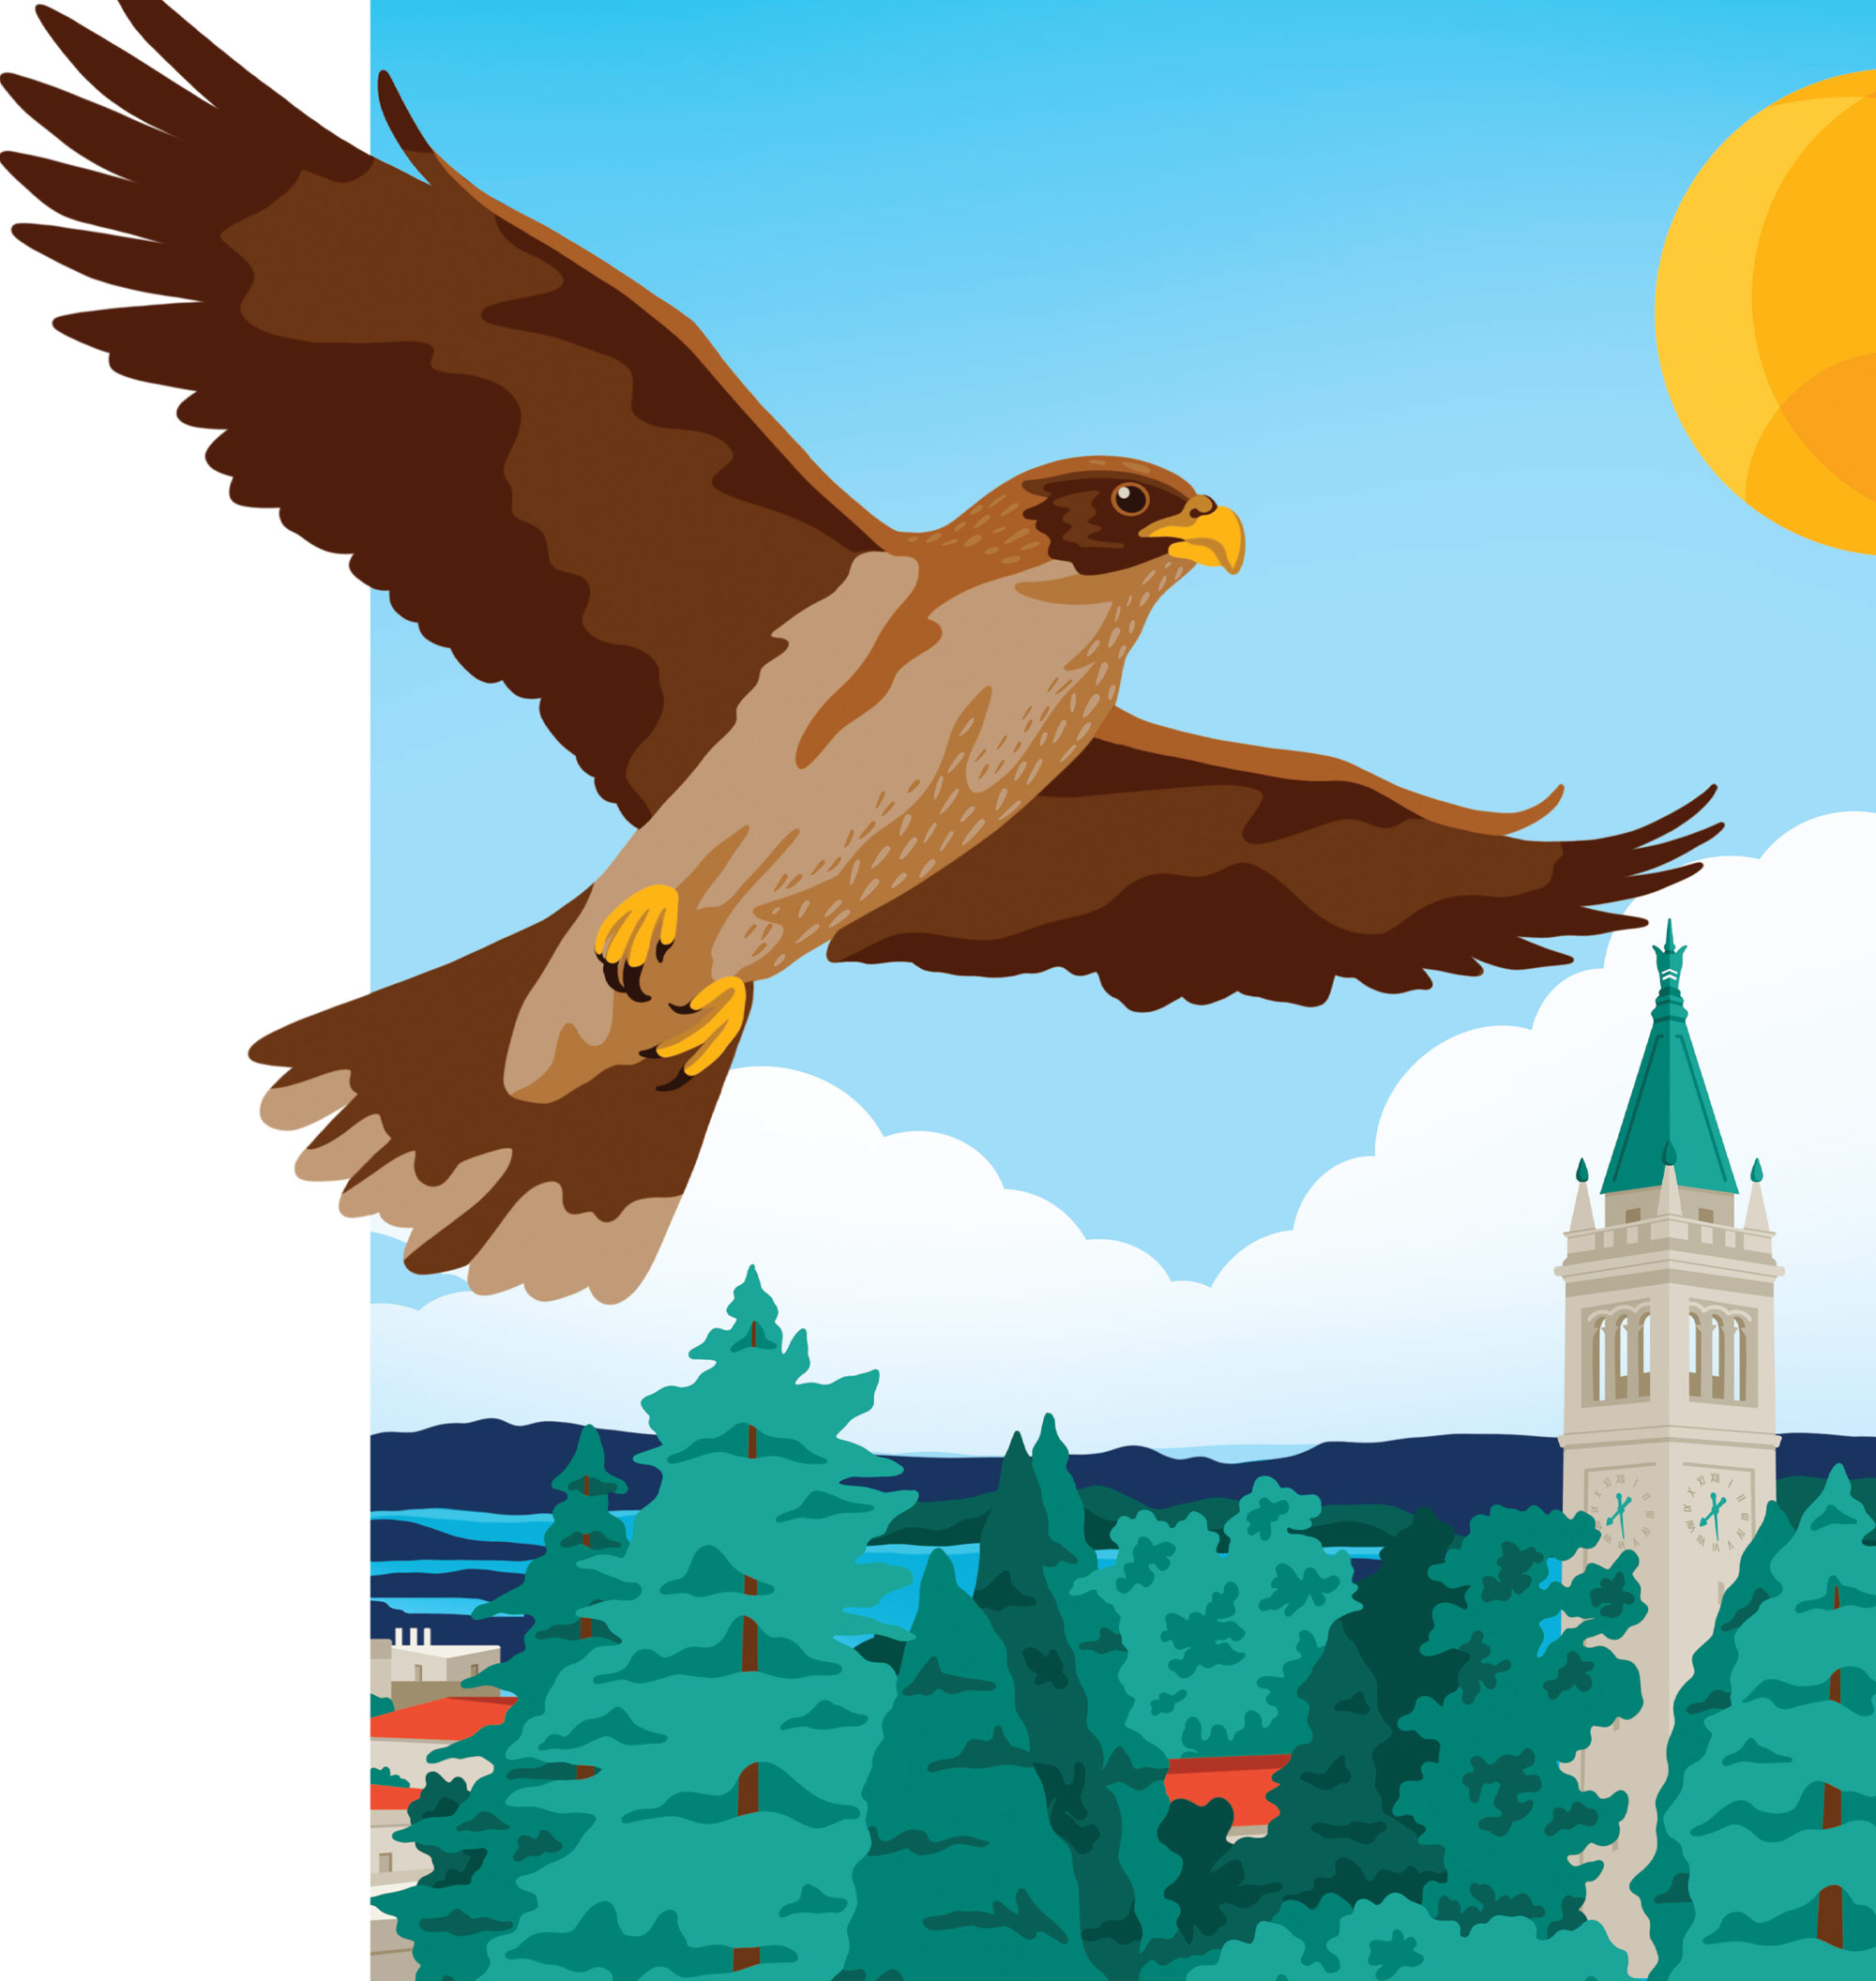 digital illustration of a brown eagle soaring over the Berkeley campus, Sather Tower is visible peaking out from a sea of trees, low buildings and surrounding landscape